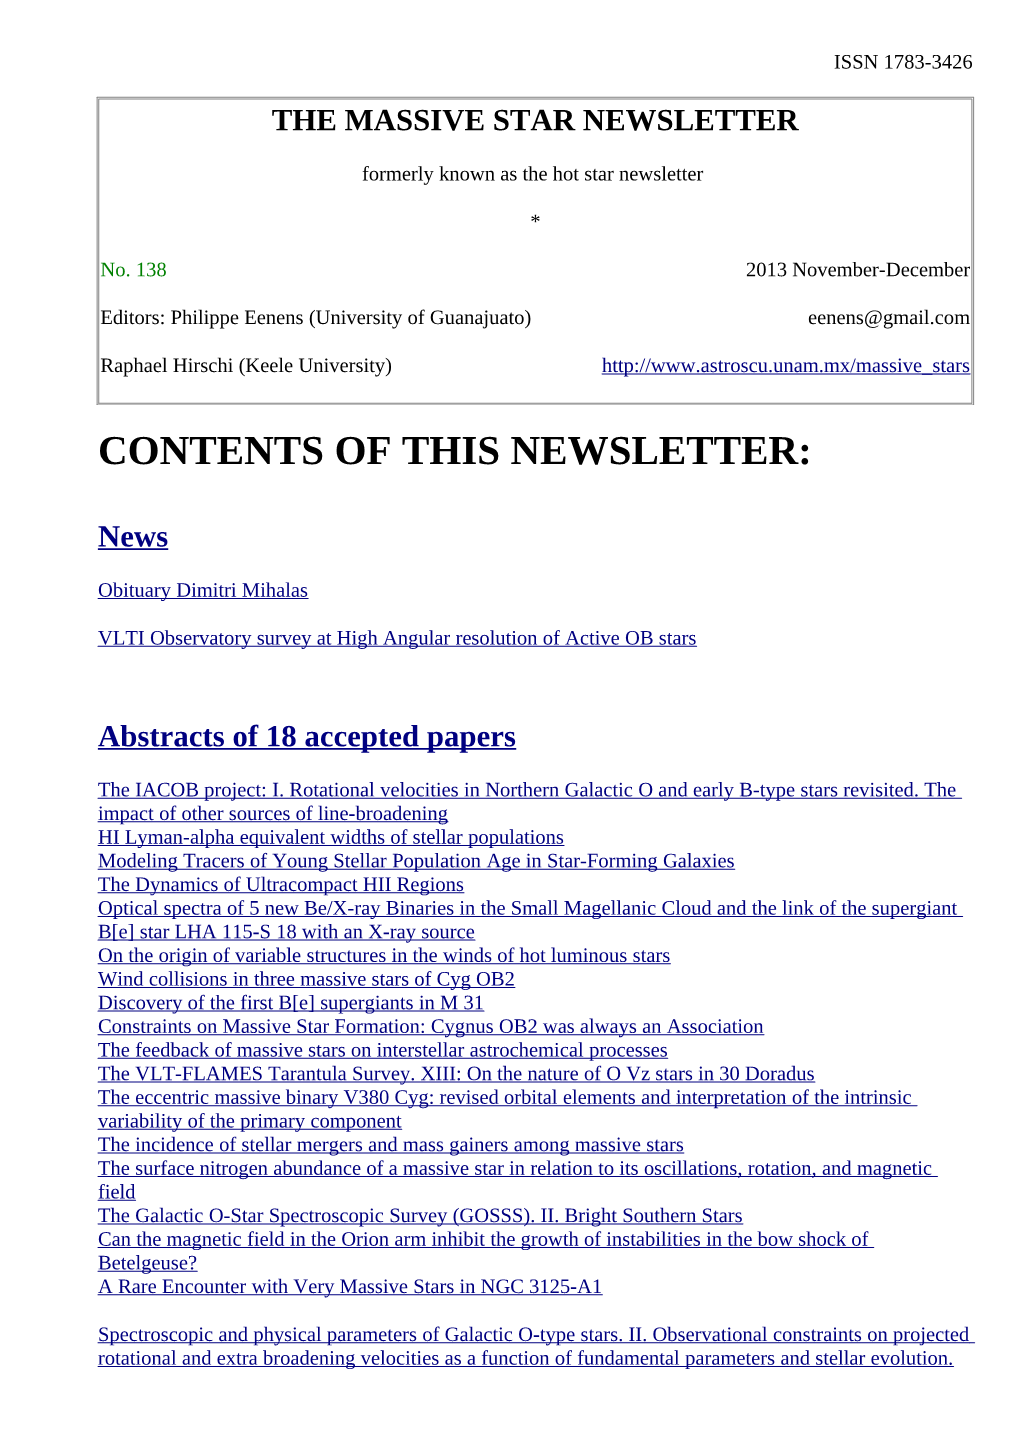 Newsletter 138 of Working Group on Massive Star